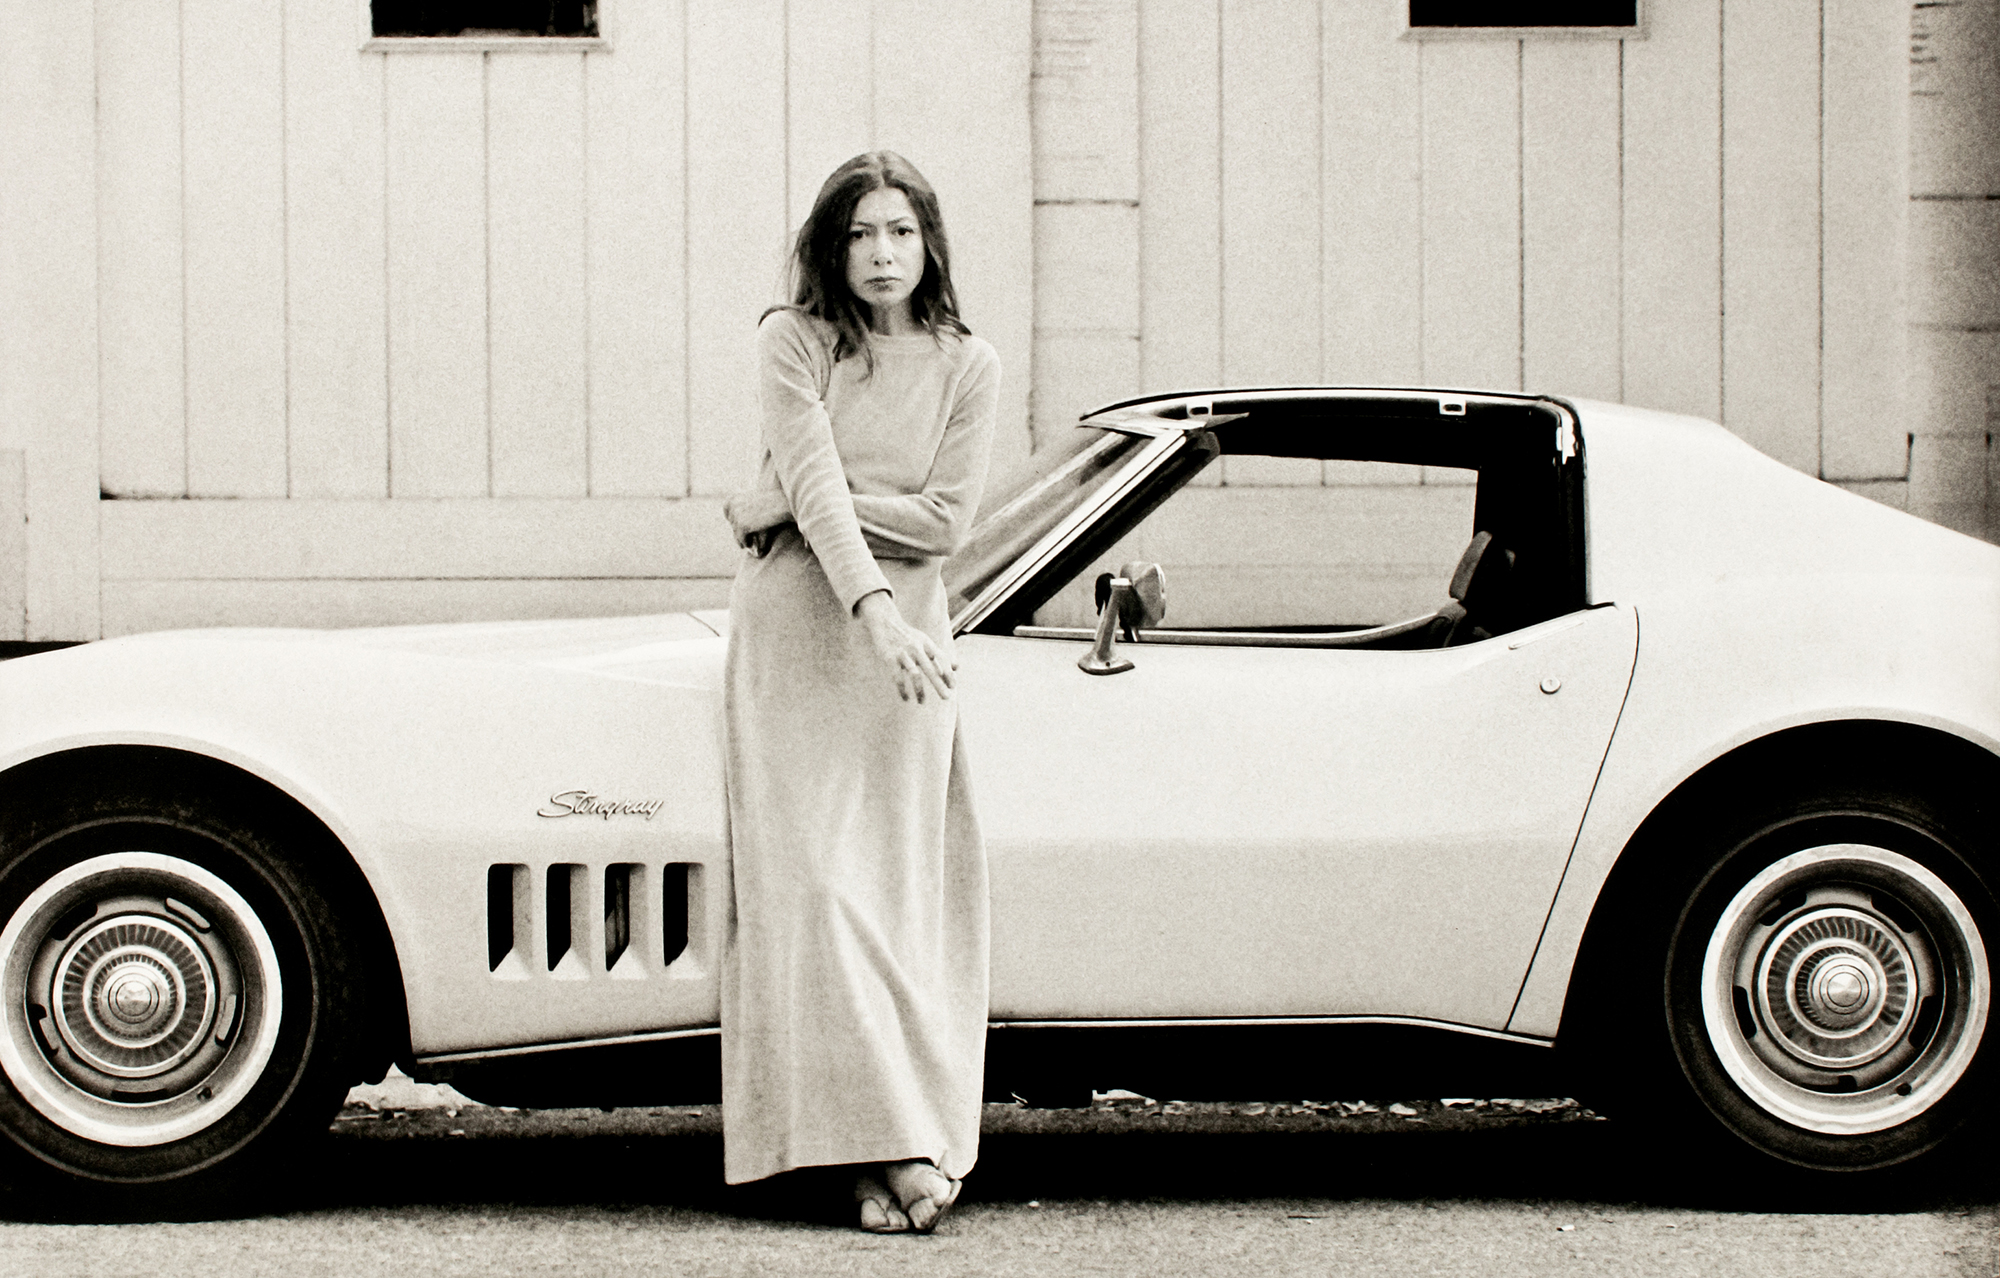 What Do Photographs Tell Us about Joan Didion's Nervy Glamour?